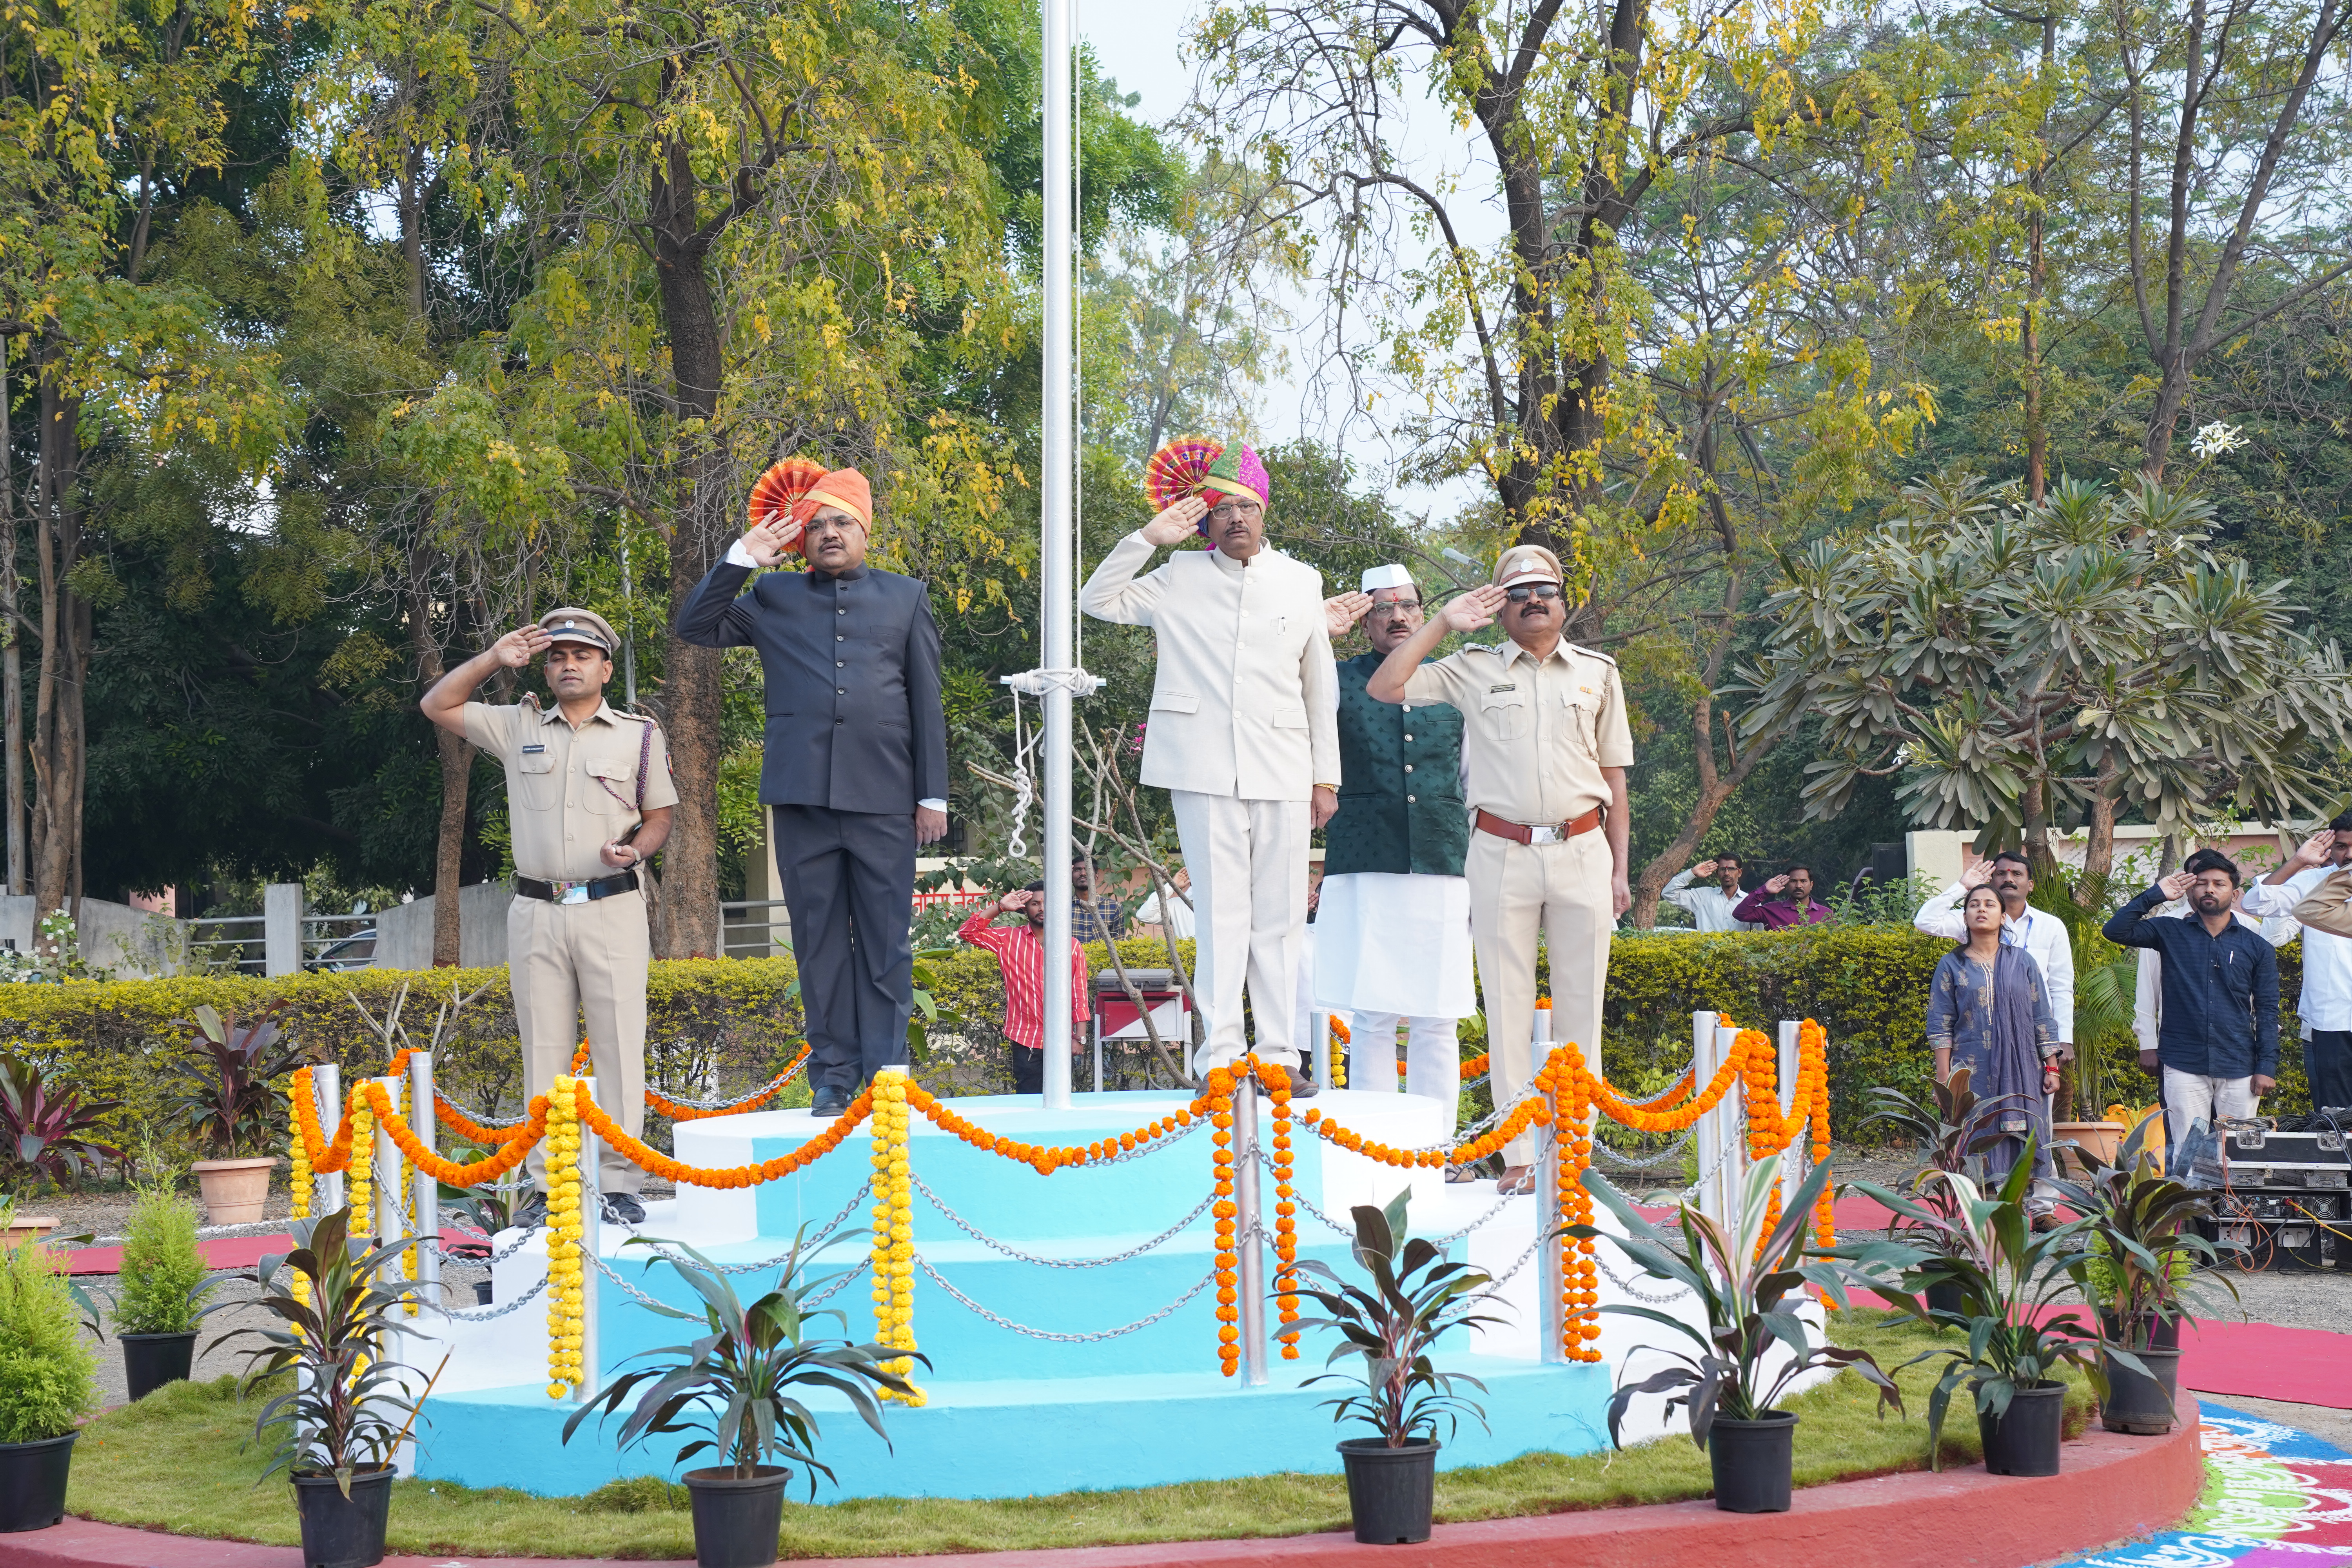 74th Republic Day celebrated 26th January, 2023